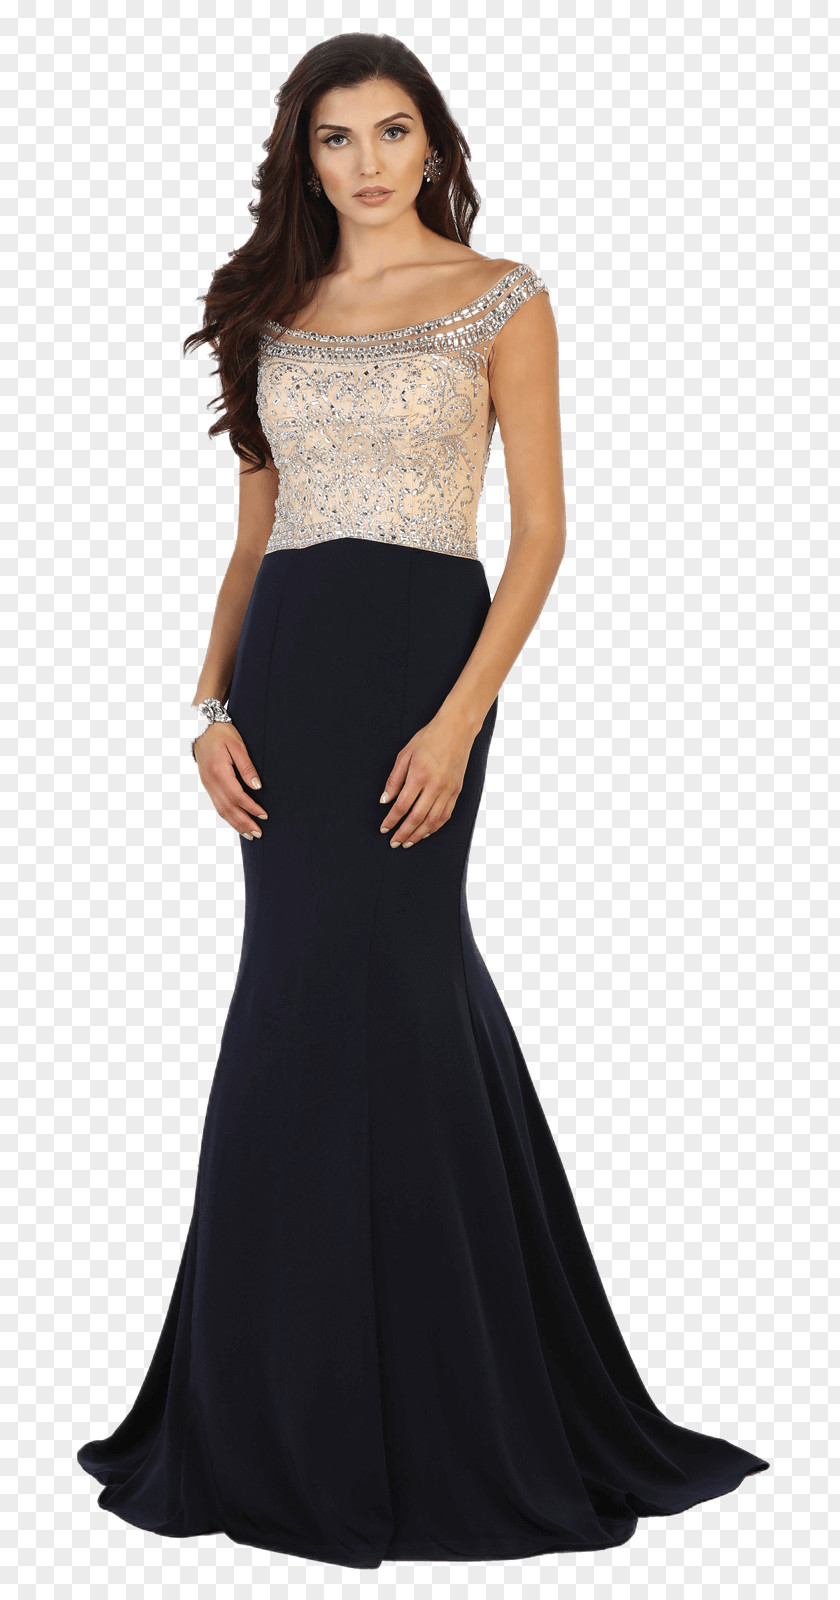 Layered Clothing Gown Prom Wedding Dress Cocktail PNG